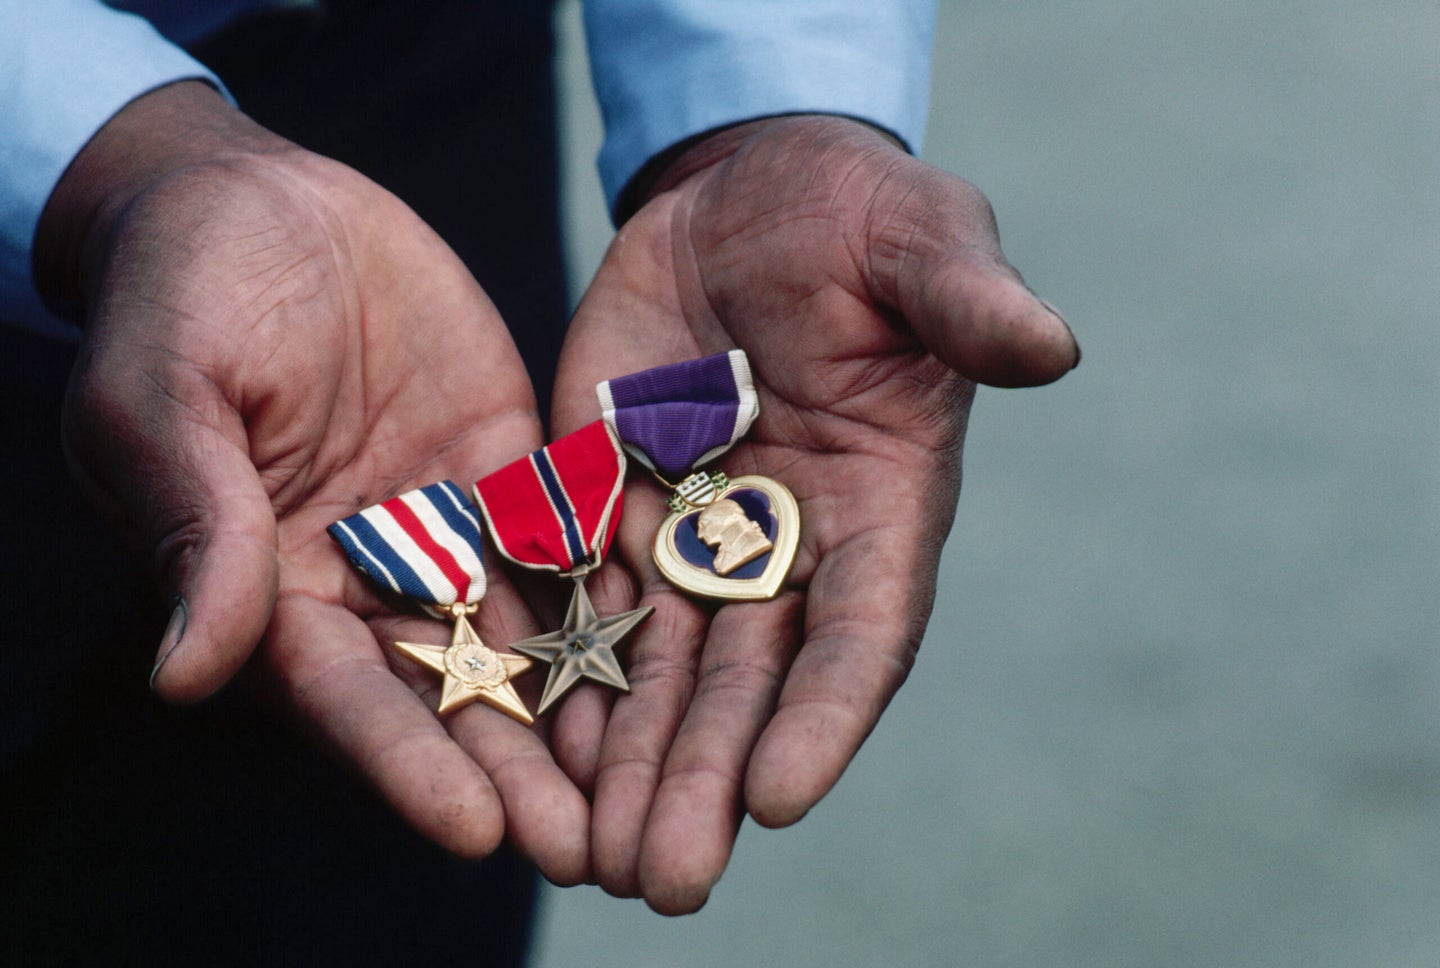 Frank Goins holds his military decorations earned for bravery in combat in Vietnam. The medals, from left to right, are: the Silver Star, the Bronze Star, and the Purple Heart. Goins served in the 1st Infantry Division, C Company, of the United States Army. (Photo by © Wally McNamee/CORBIS/Corbis via Getty Images)